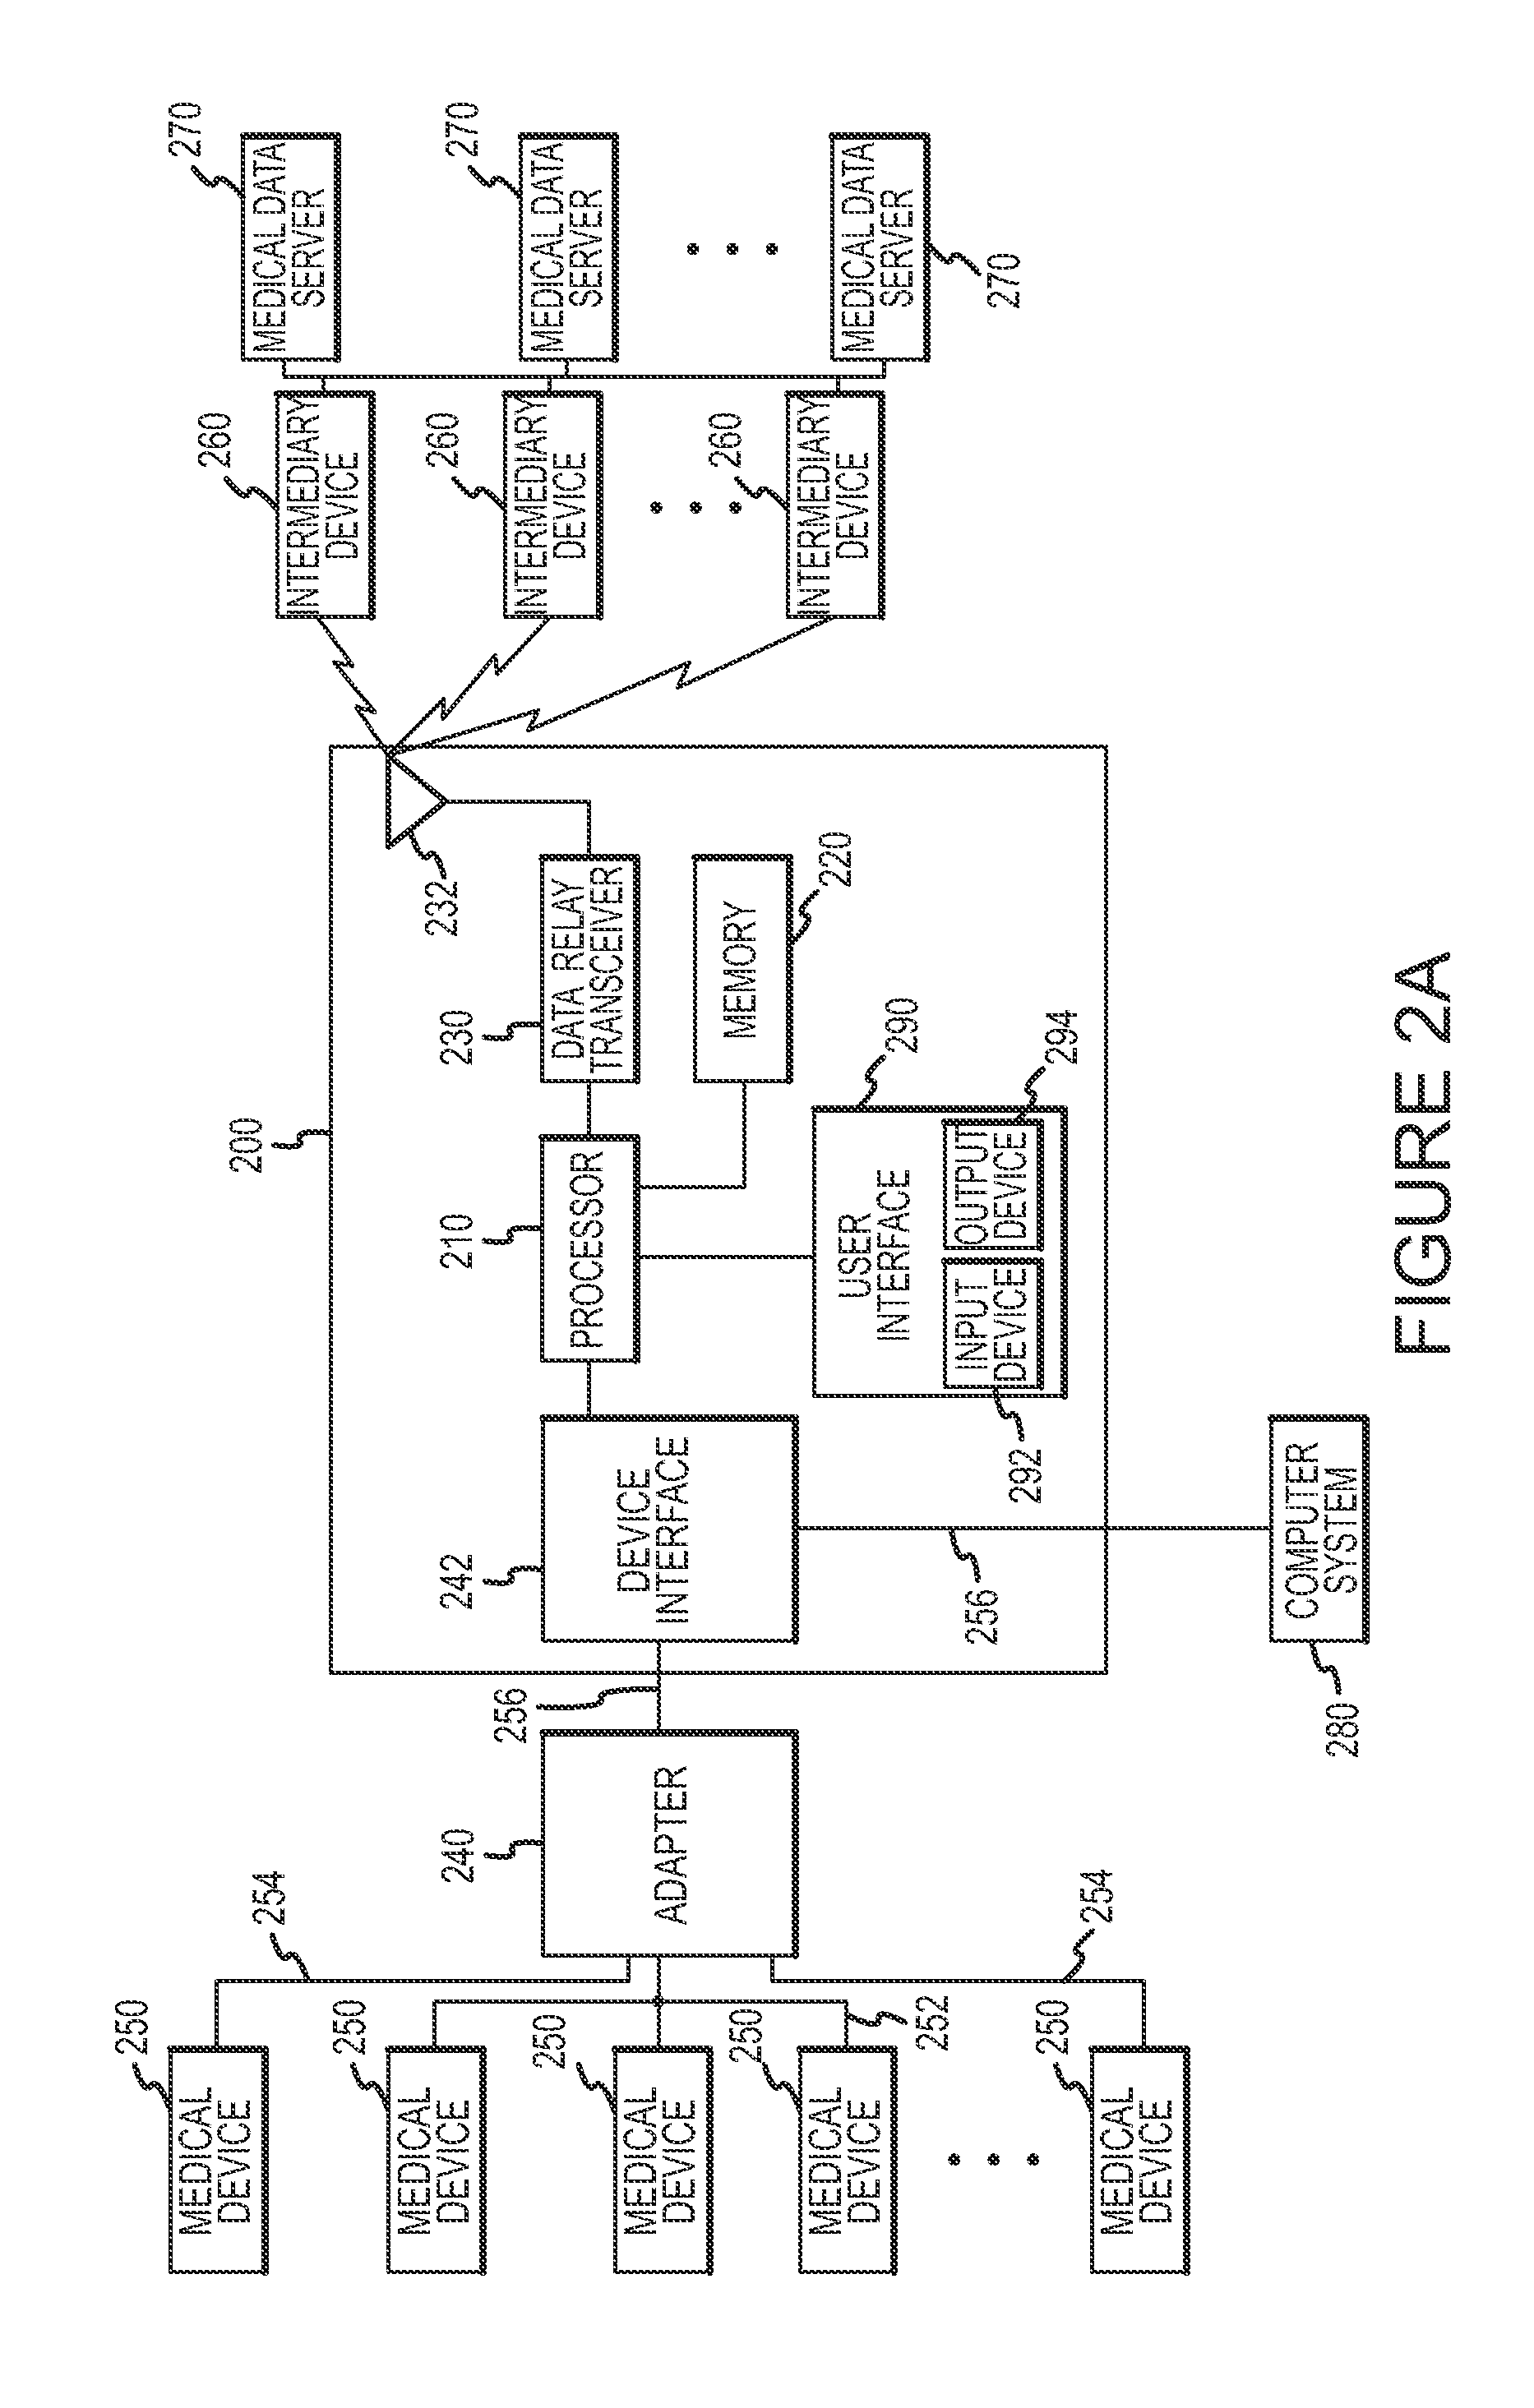 Methods for voice communication through personal emergency response system